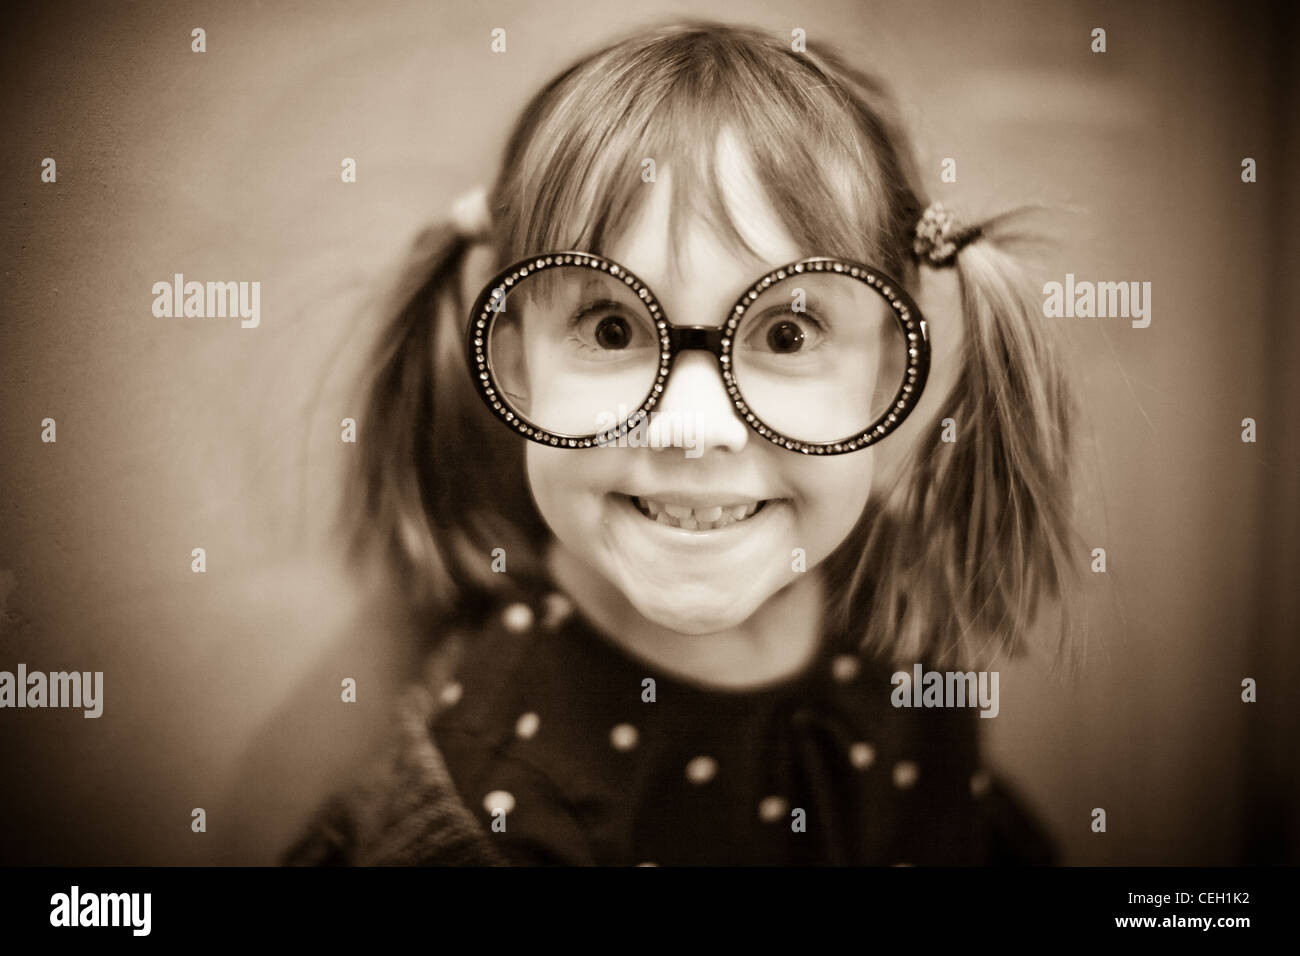 GIrl with big glasses on making a funny face Stock Photo